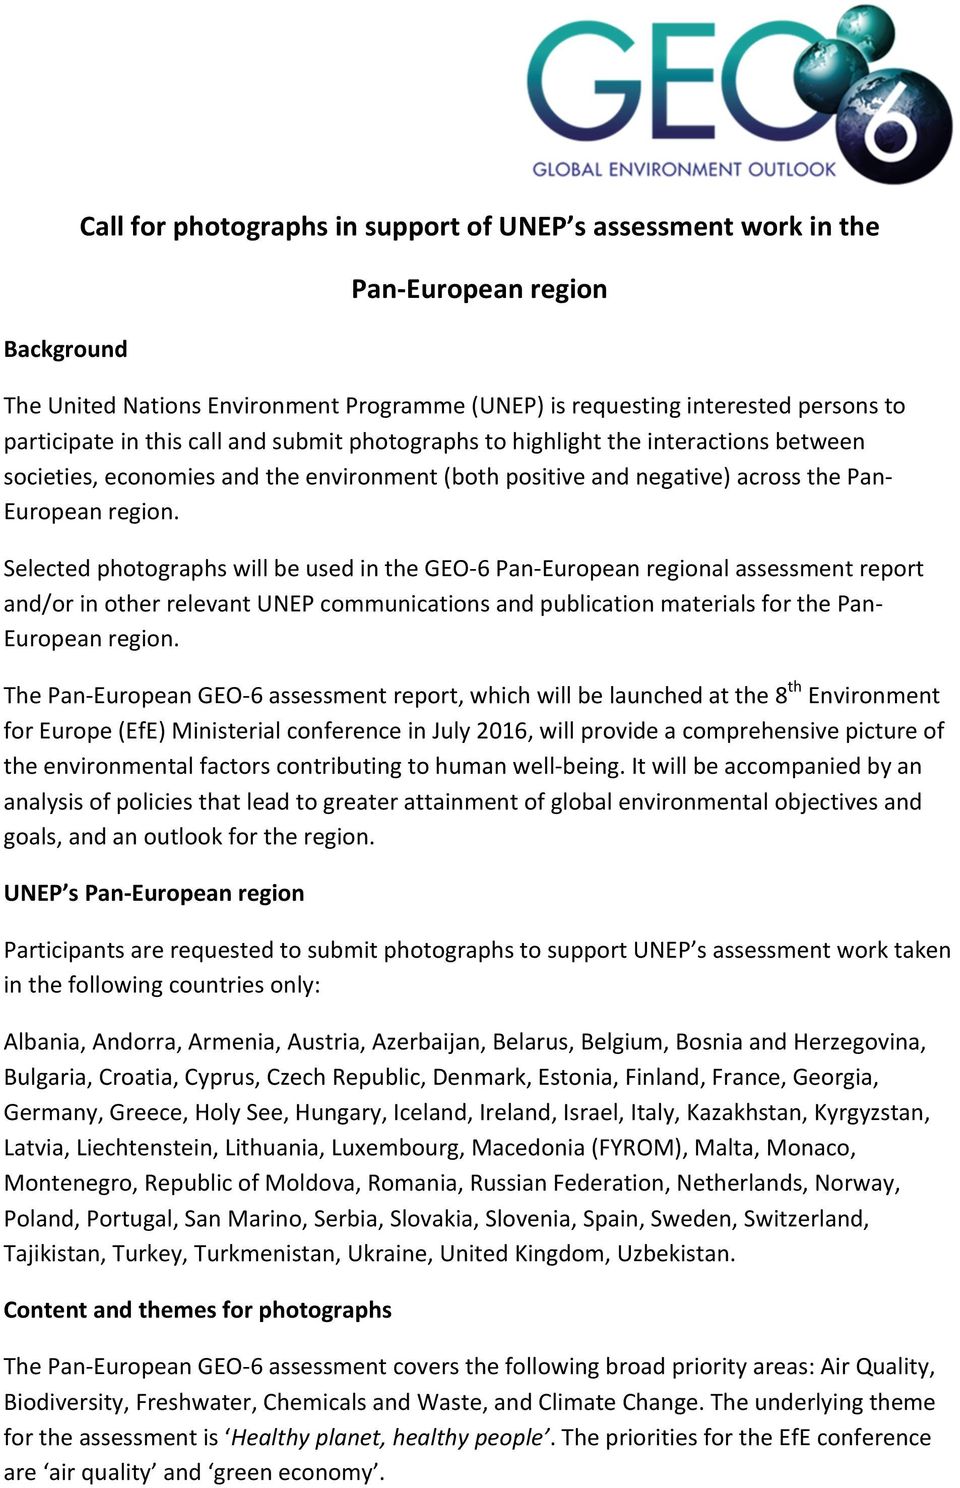 Selected photographs will be used in the GEO6 PanEuropean regional assessment report and/or in other relevant UNEP communications and publication materials for the Pan European region.